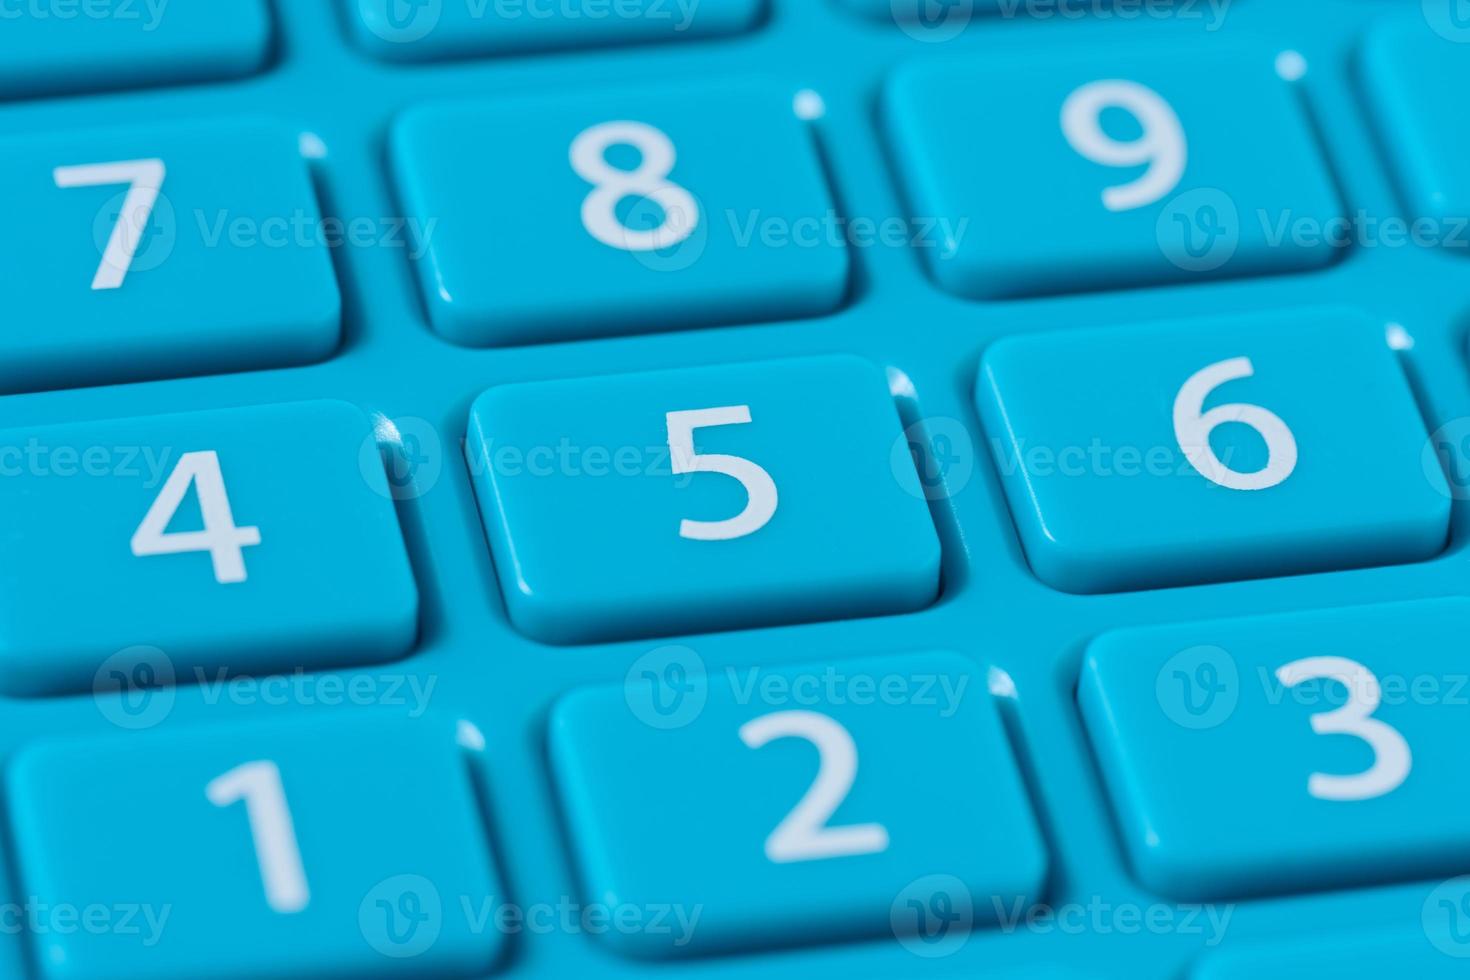 Button with numbers on a blue plastic calculator, keyboard photo